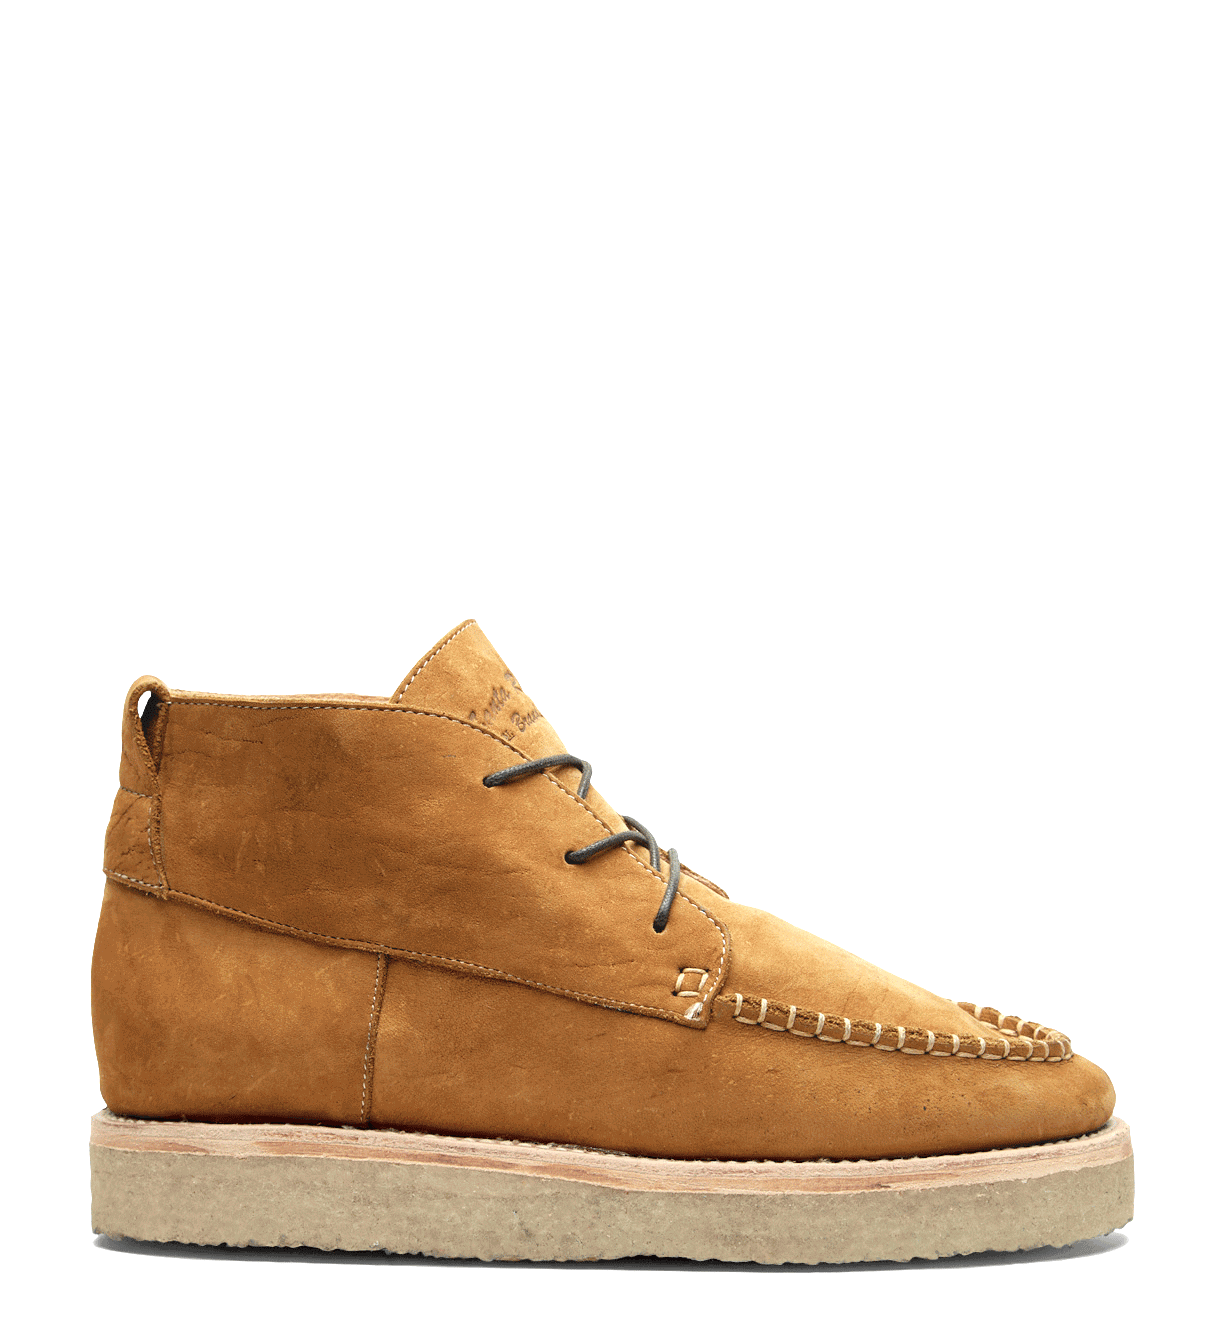 A single brown Santa Rosa Brand Tahoma Moccasin kudu leather chukka boot isolated on a white background.